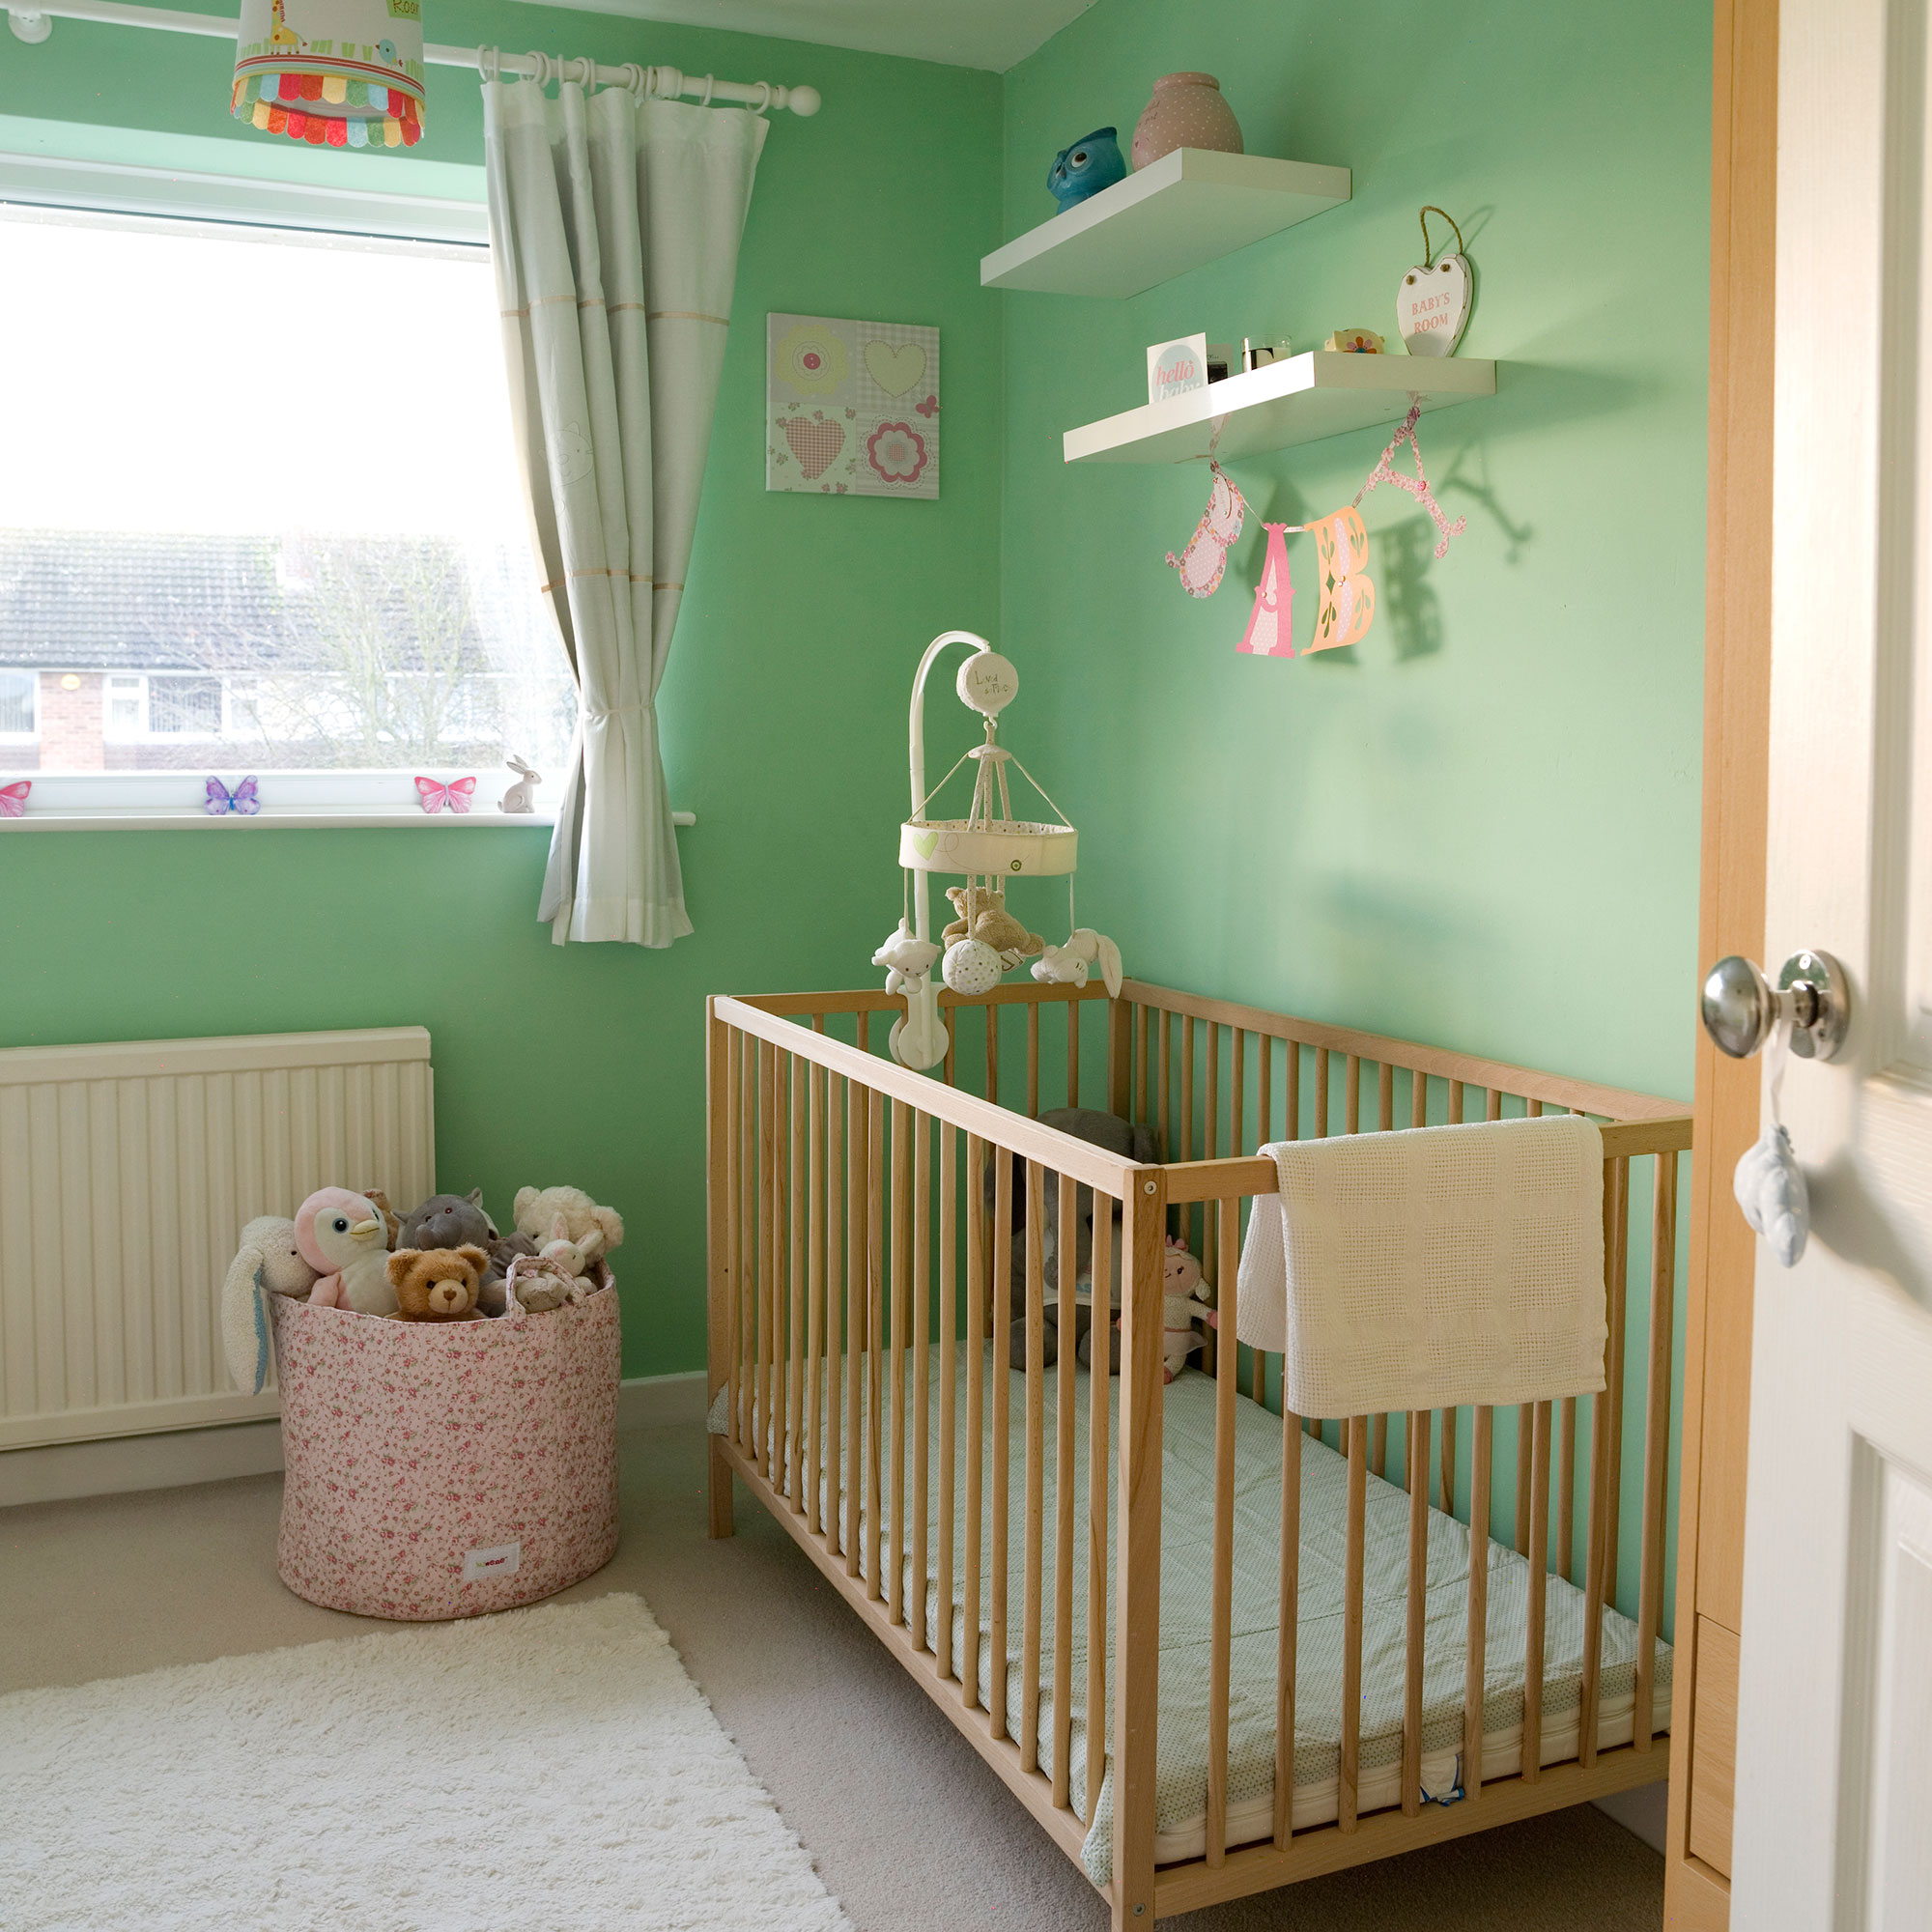 Green nursery with warm wood cot and mobile above cot